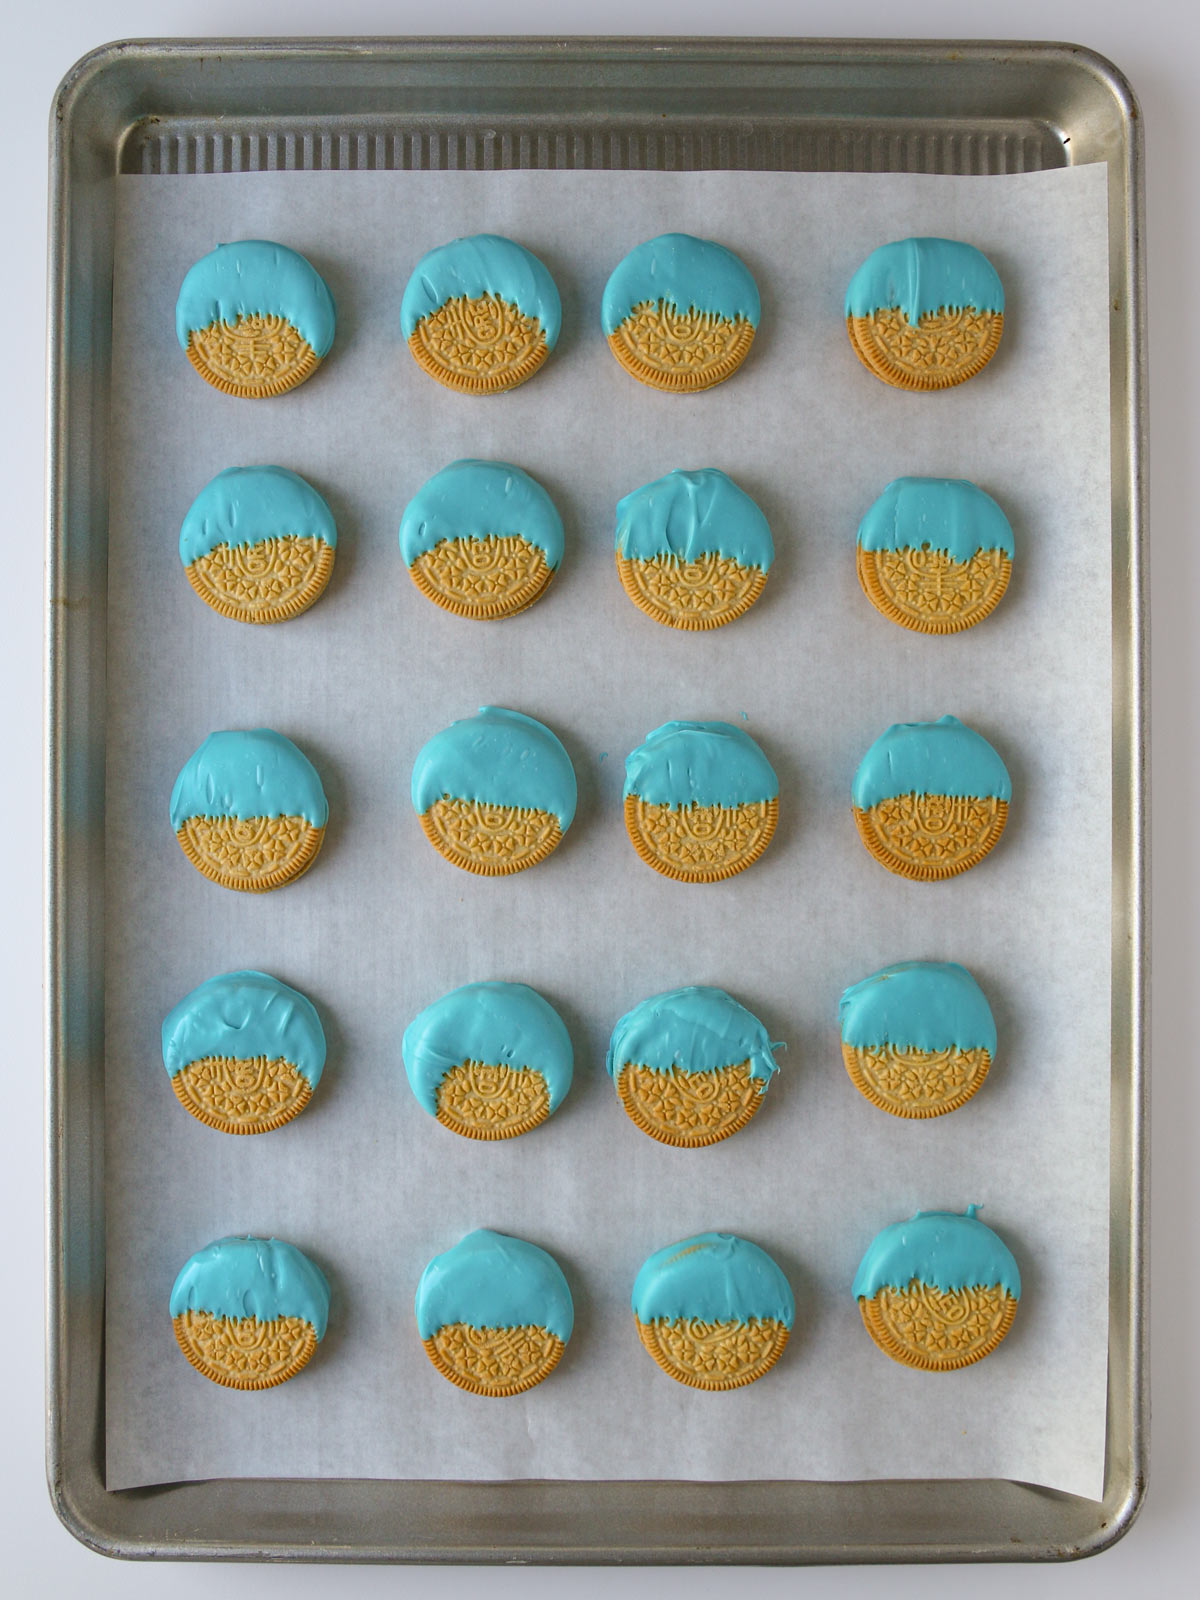 array of cookies dipped in blue candy melt on a lined tray.